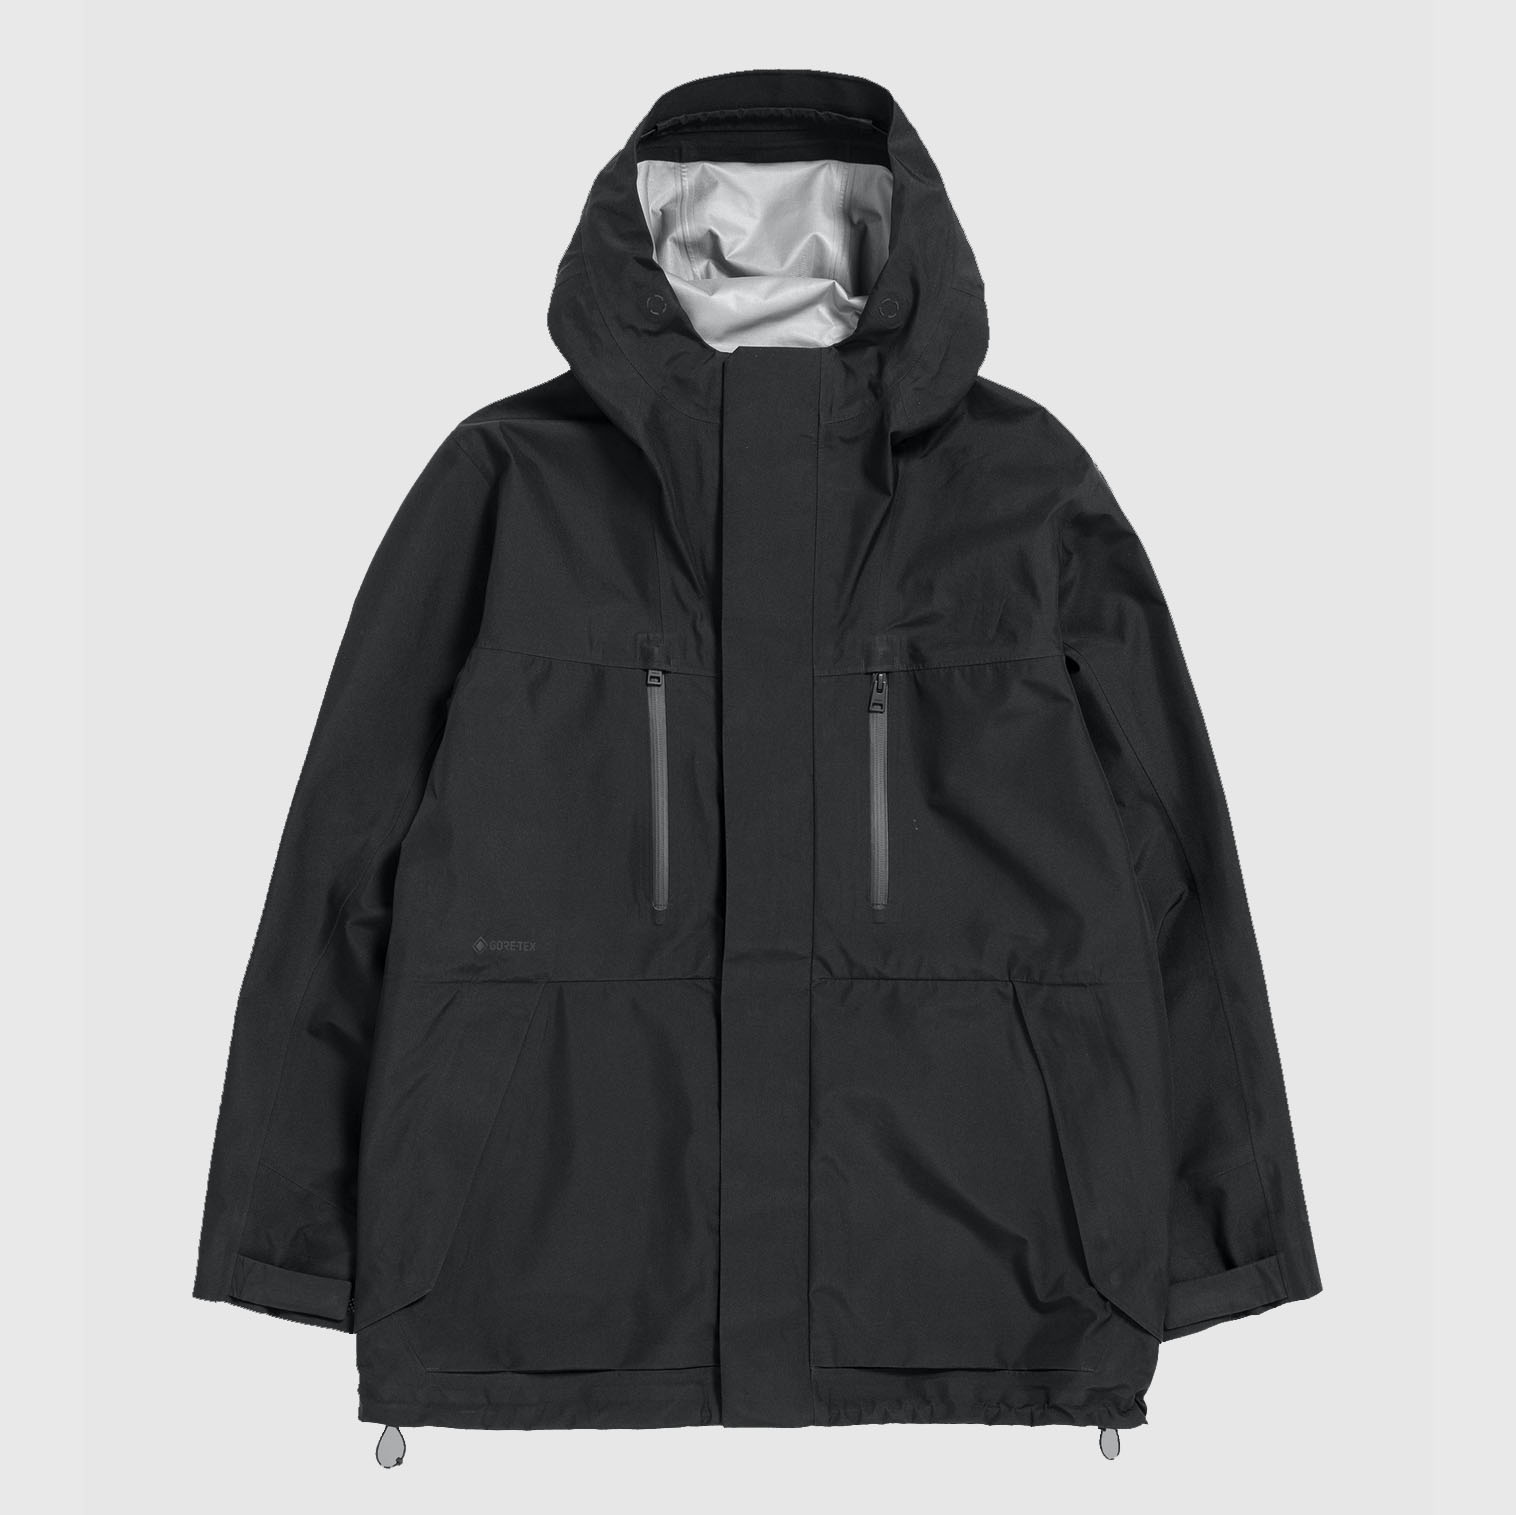 Norse Projects Arktisk Hooded Parka Gore-Tex 3L Shell Black - DIV ...